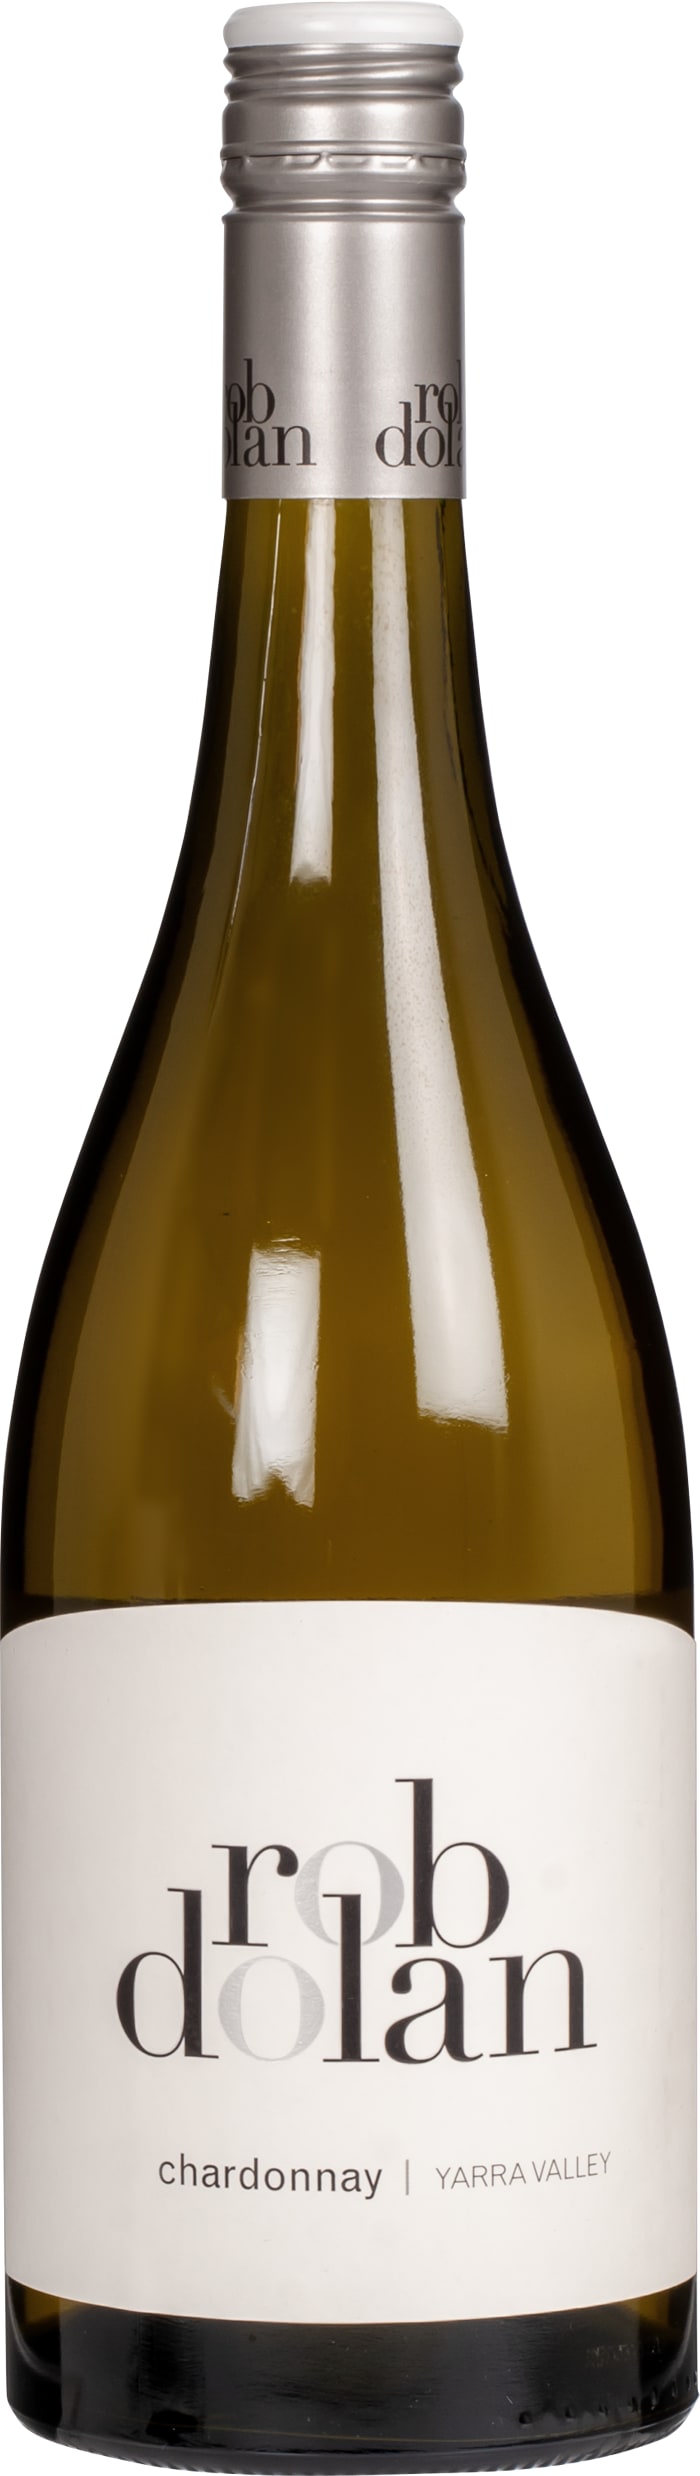 Rob Dolan White Label Chardonnay 2020 75cl - Buy Rob Dolan Wines from GREAT WINES DIRECT wine shop